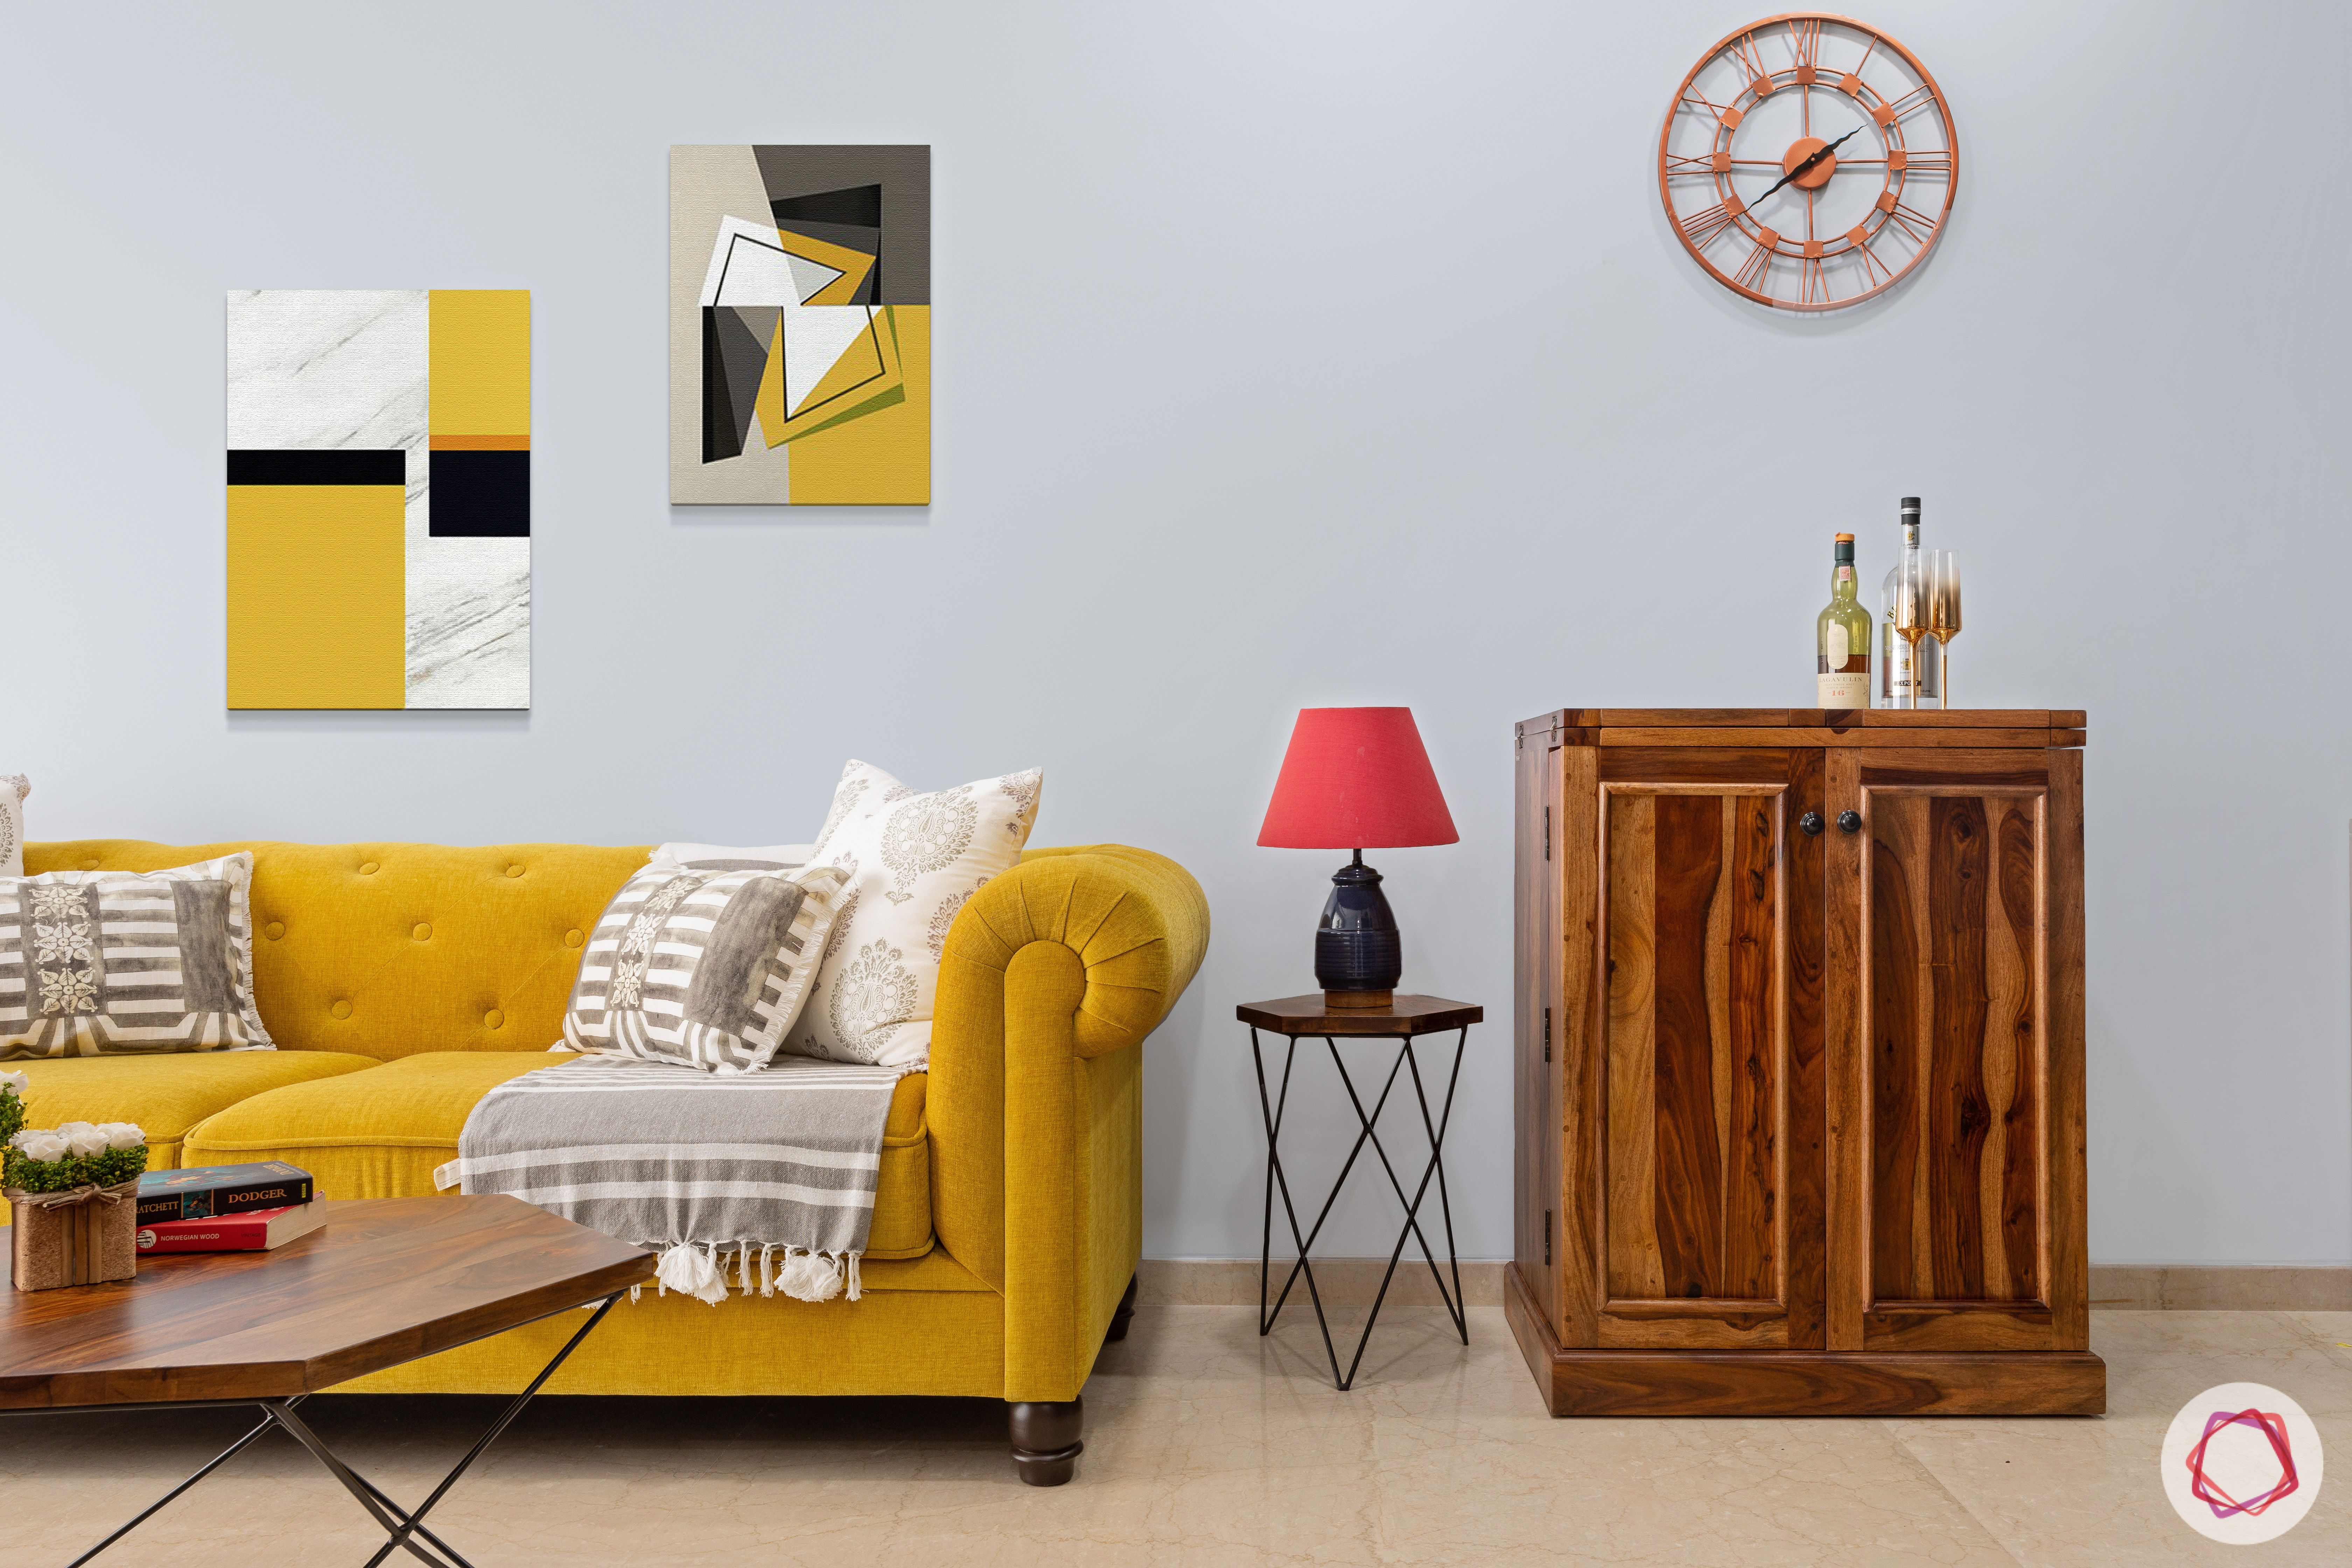 crescent bay-living room-yellow sofa-wooden bar unit-wooden side table